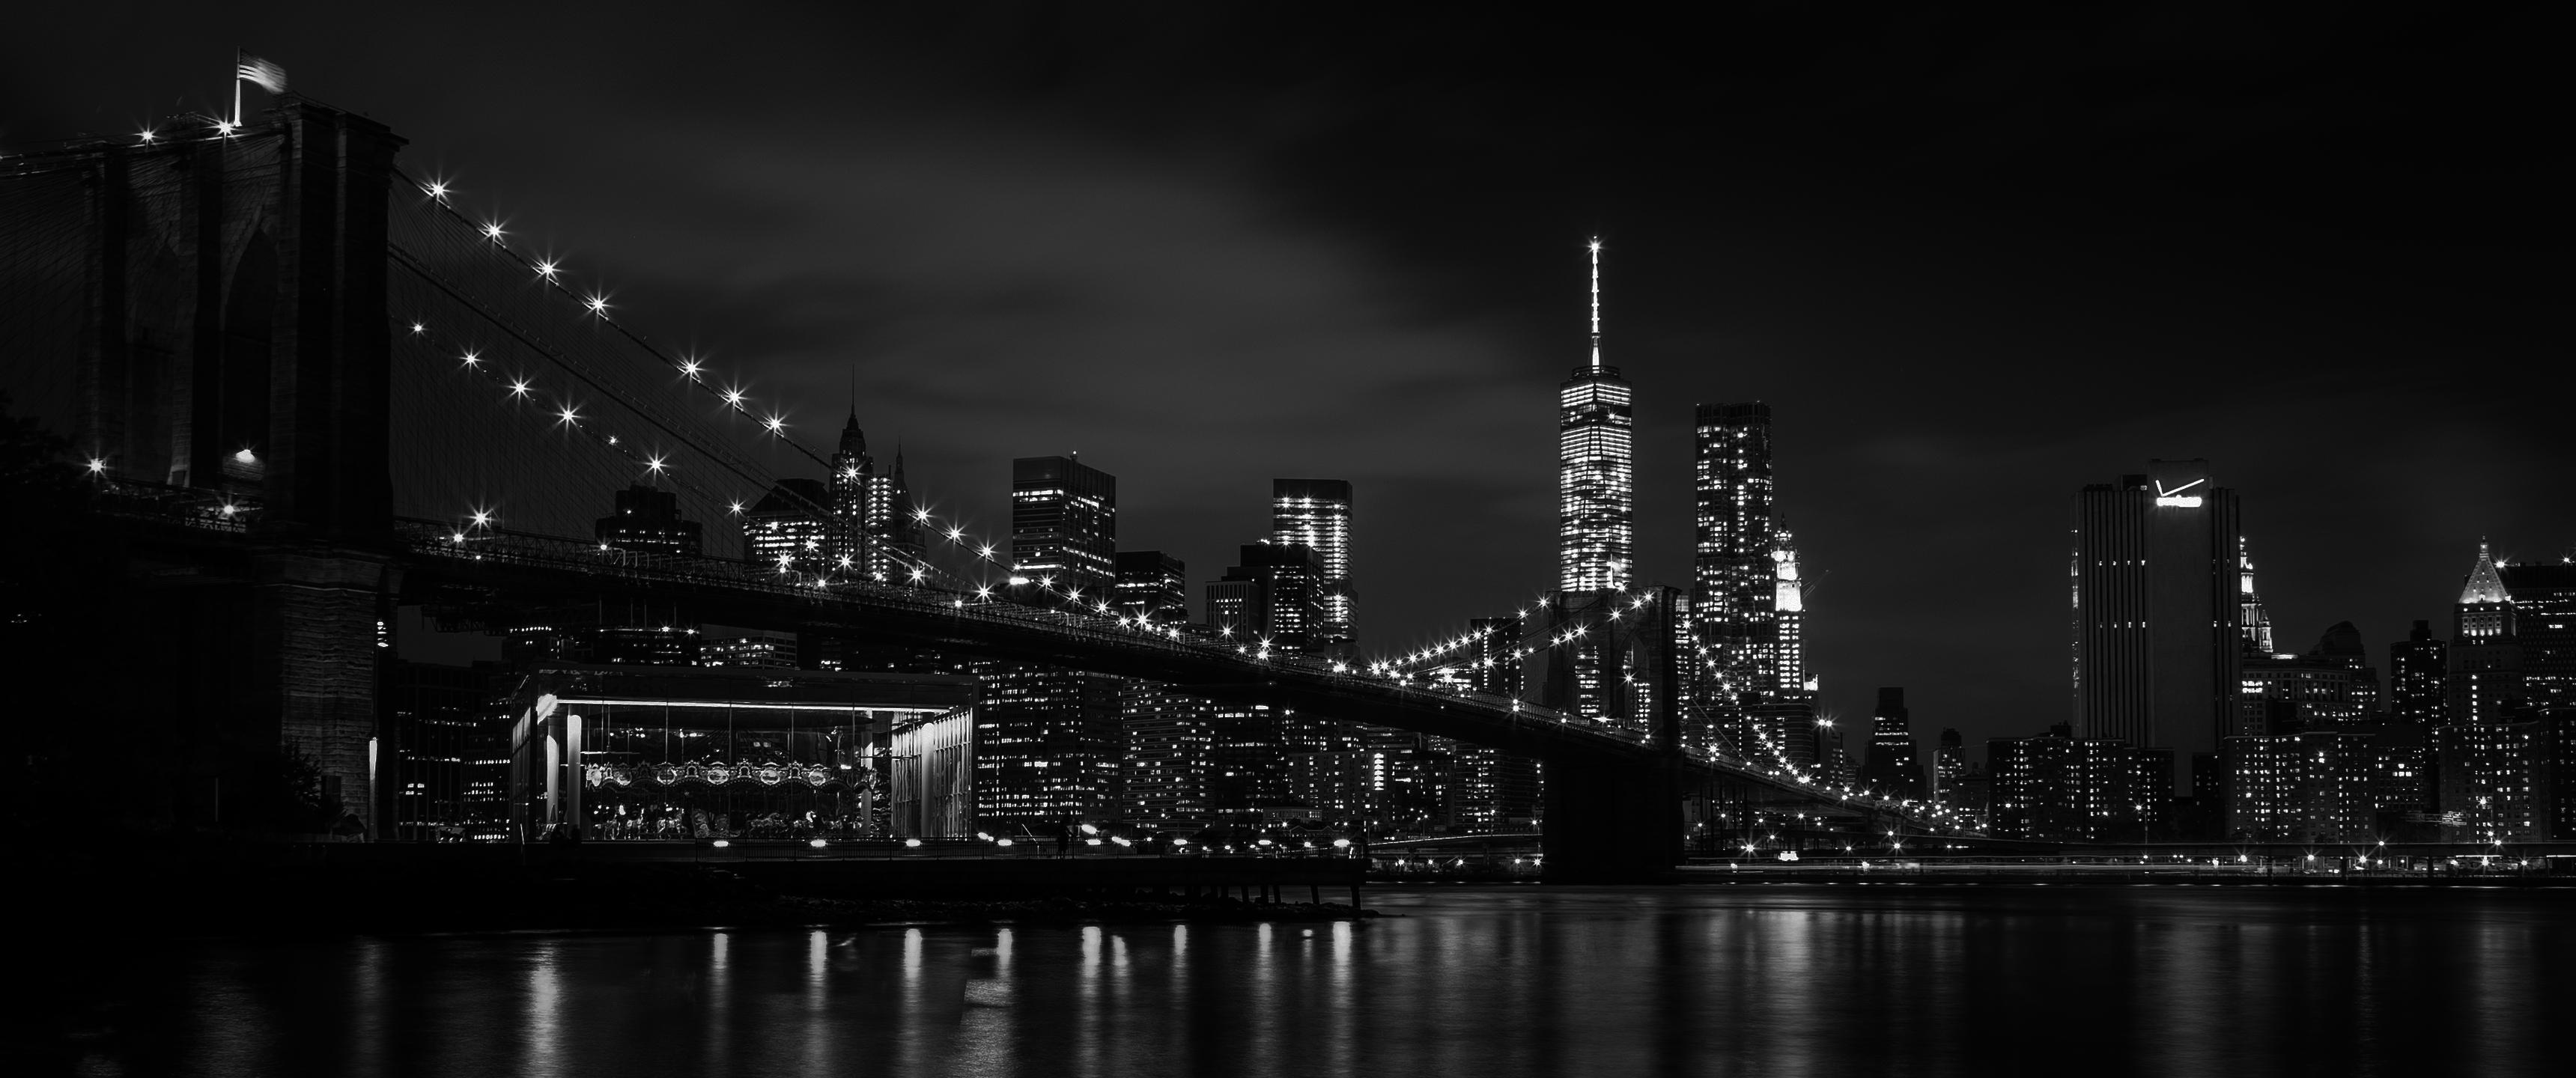 Black and White 3440X1440 Wallpapers - Top Free Black and White ...